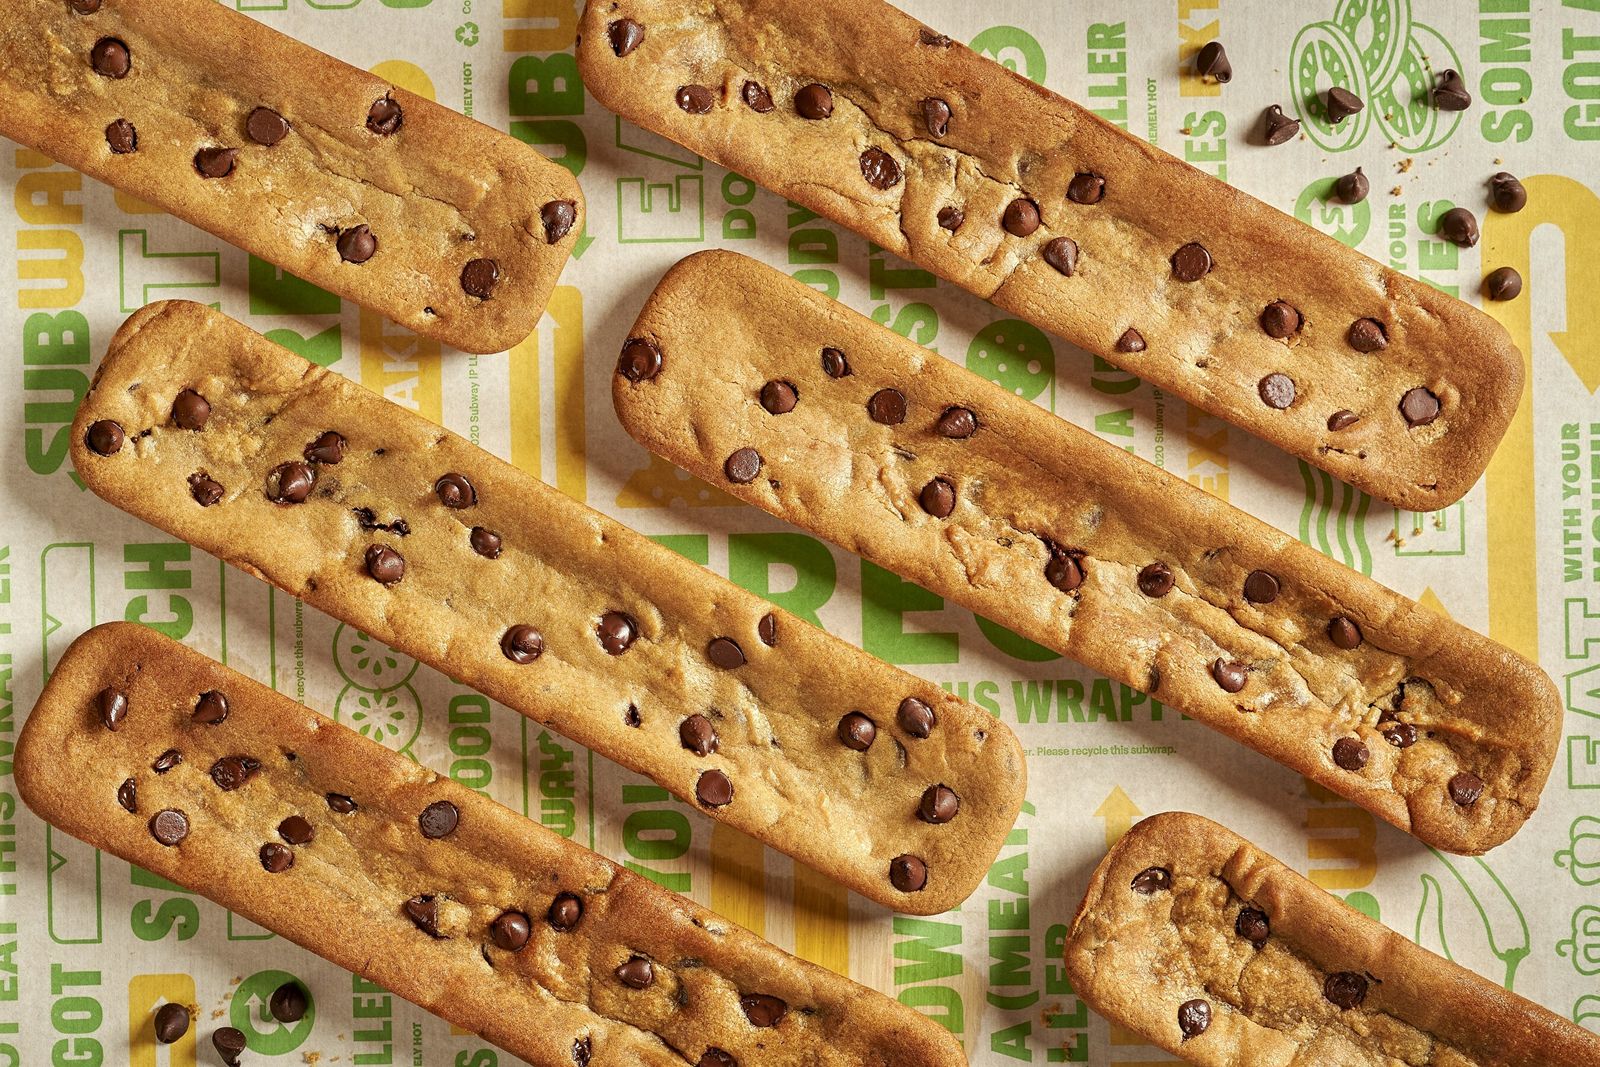 Subway Celebrates National Cookie Day in a Big Way With a Sneak Peek of Its New Footlong Cookie